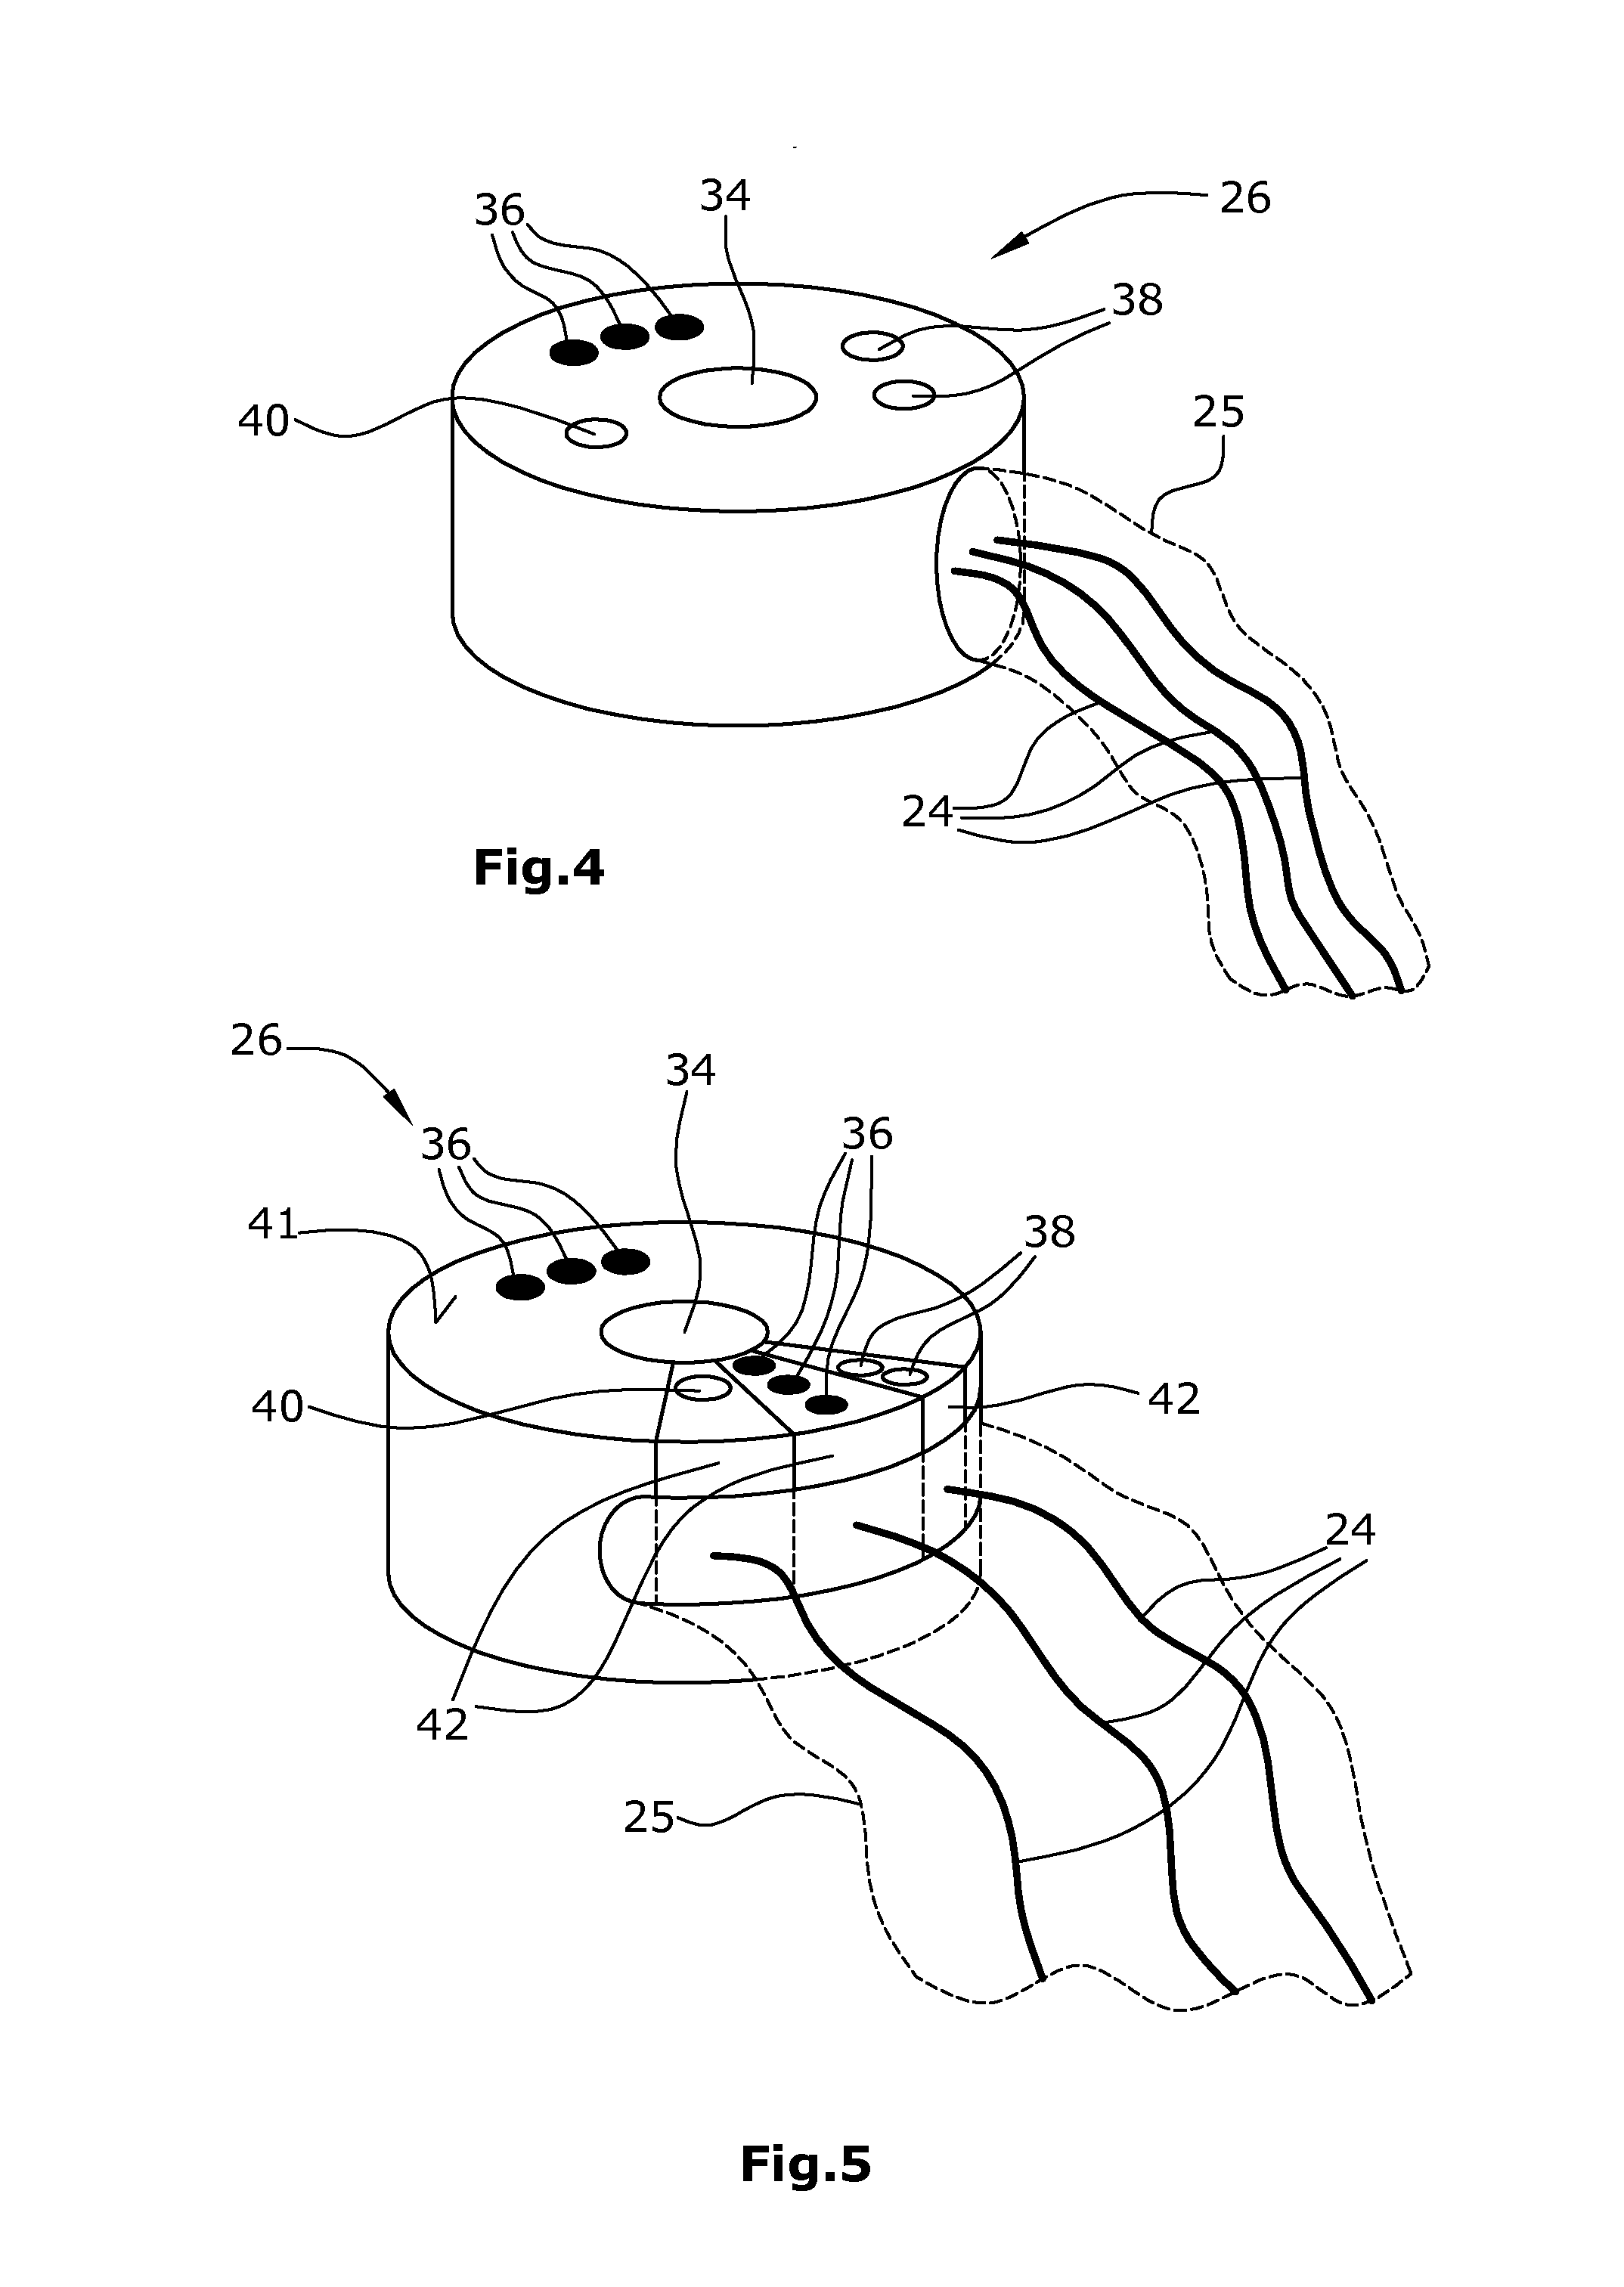 Robotic arrangement for use in medical fields